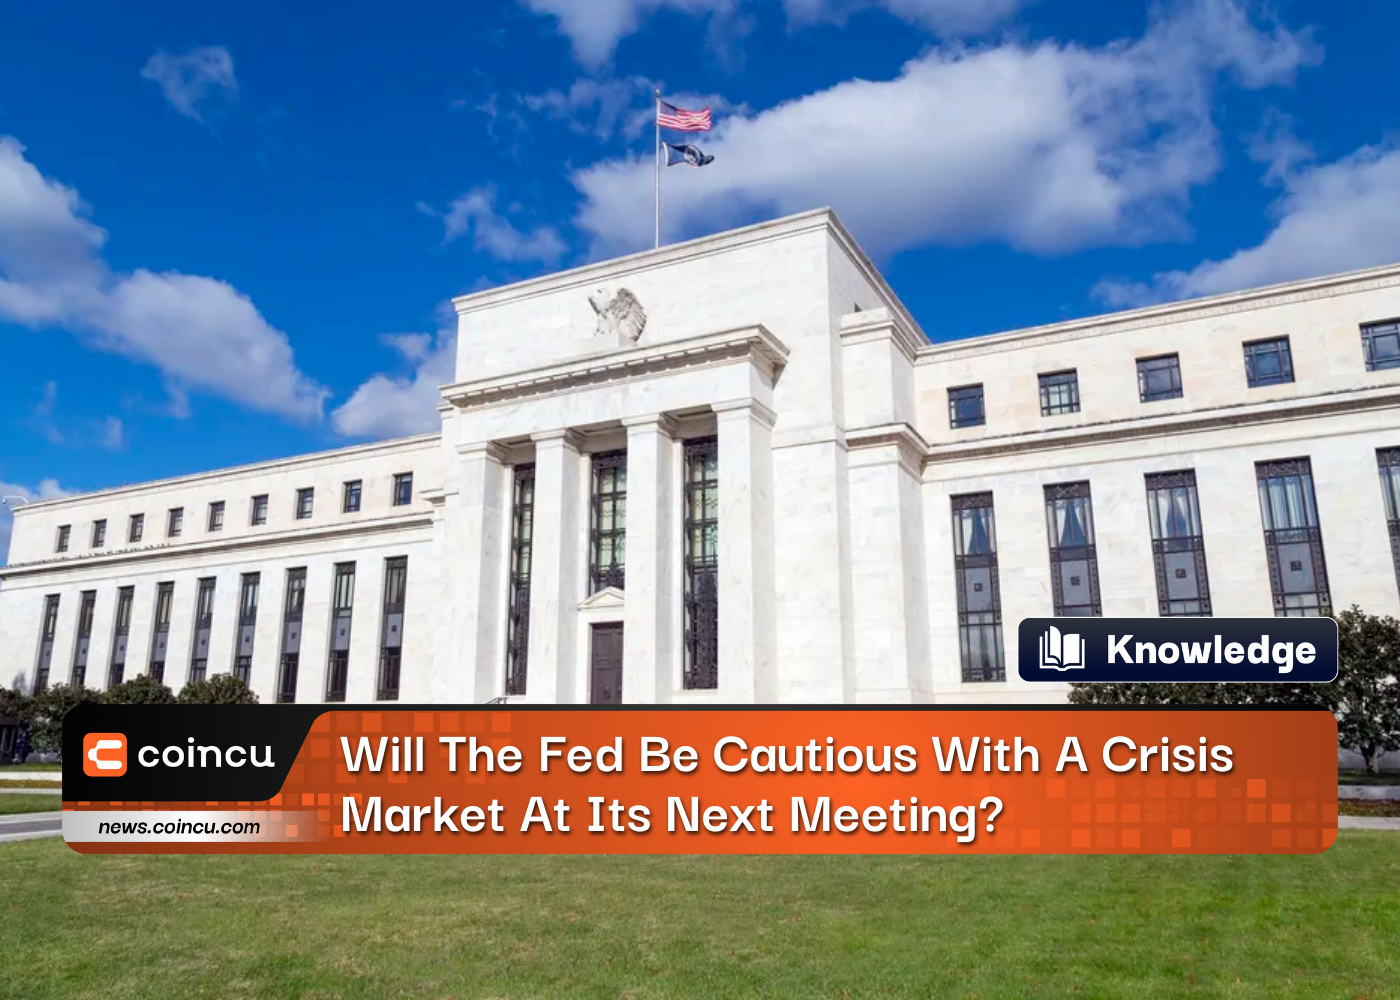 Will The Fed Be Cautious With A Crisis Market At Its Next Meeting?